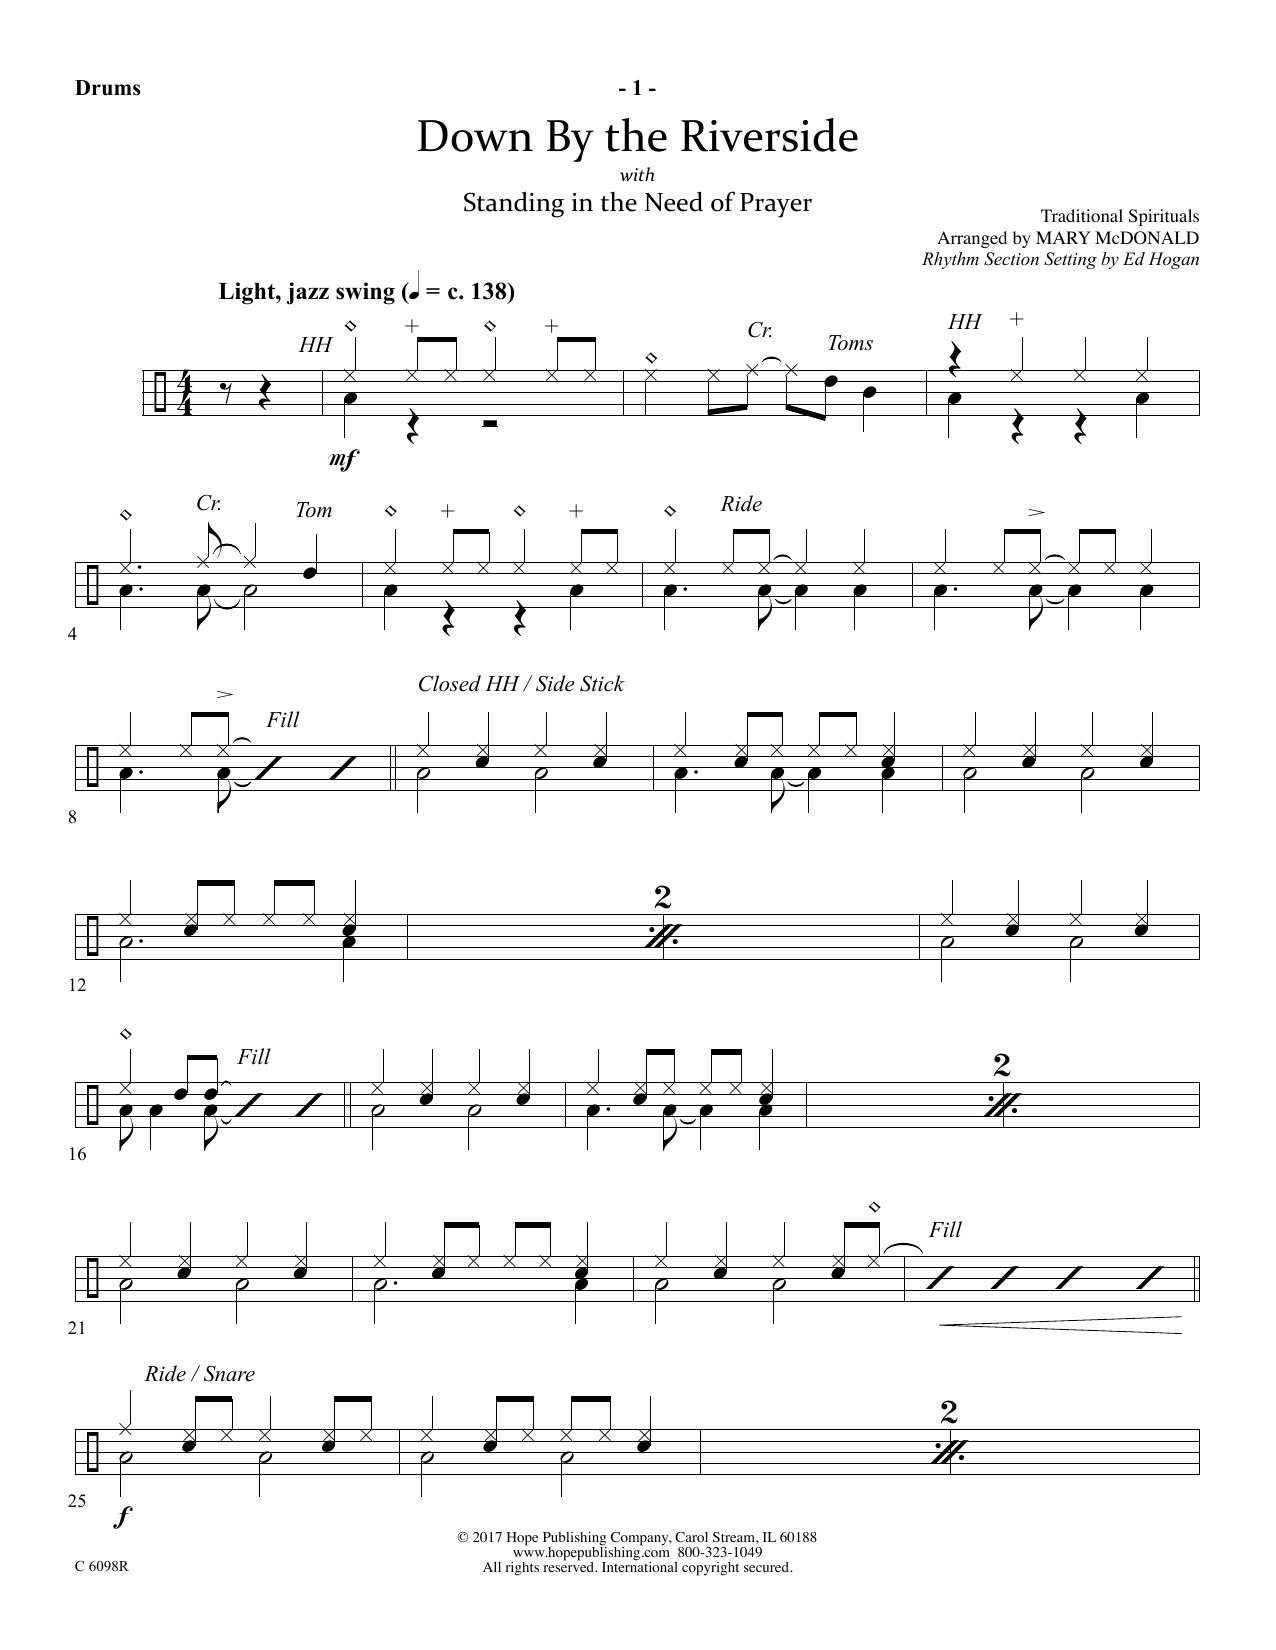 Download Ed Hogan Down by the Riverside - Drums Sheet Music